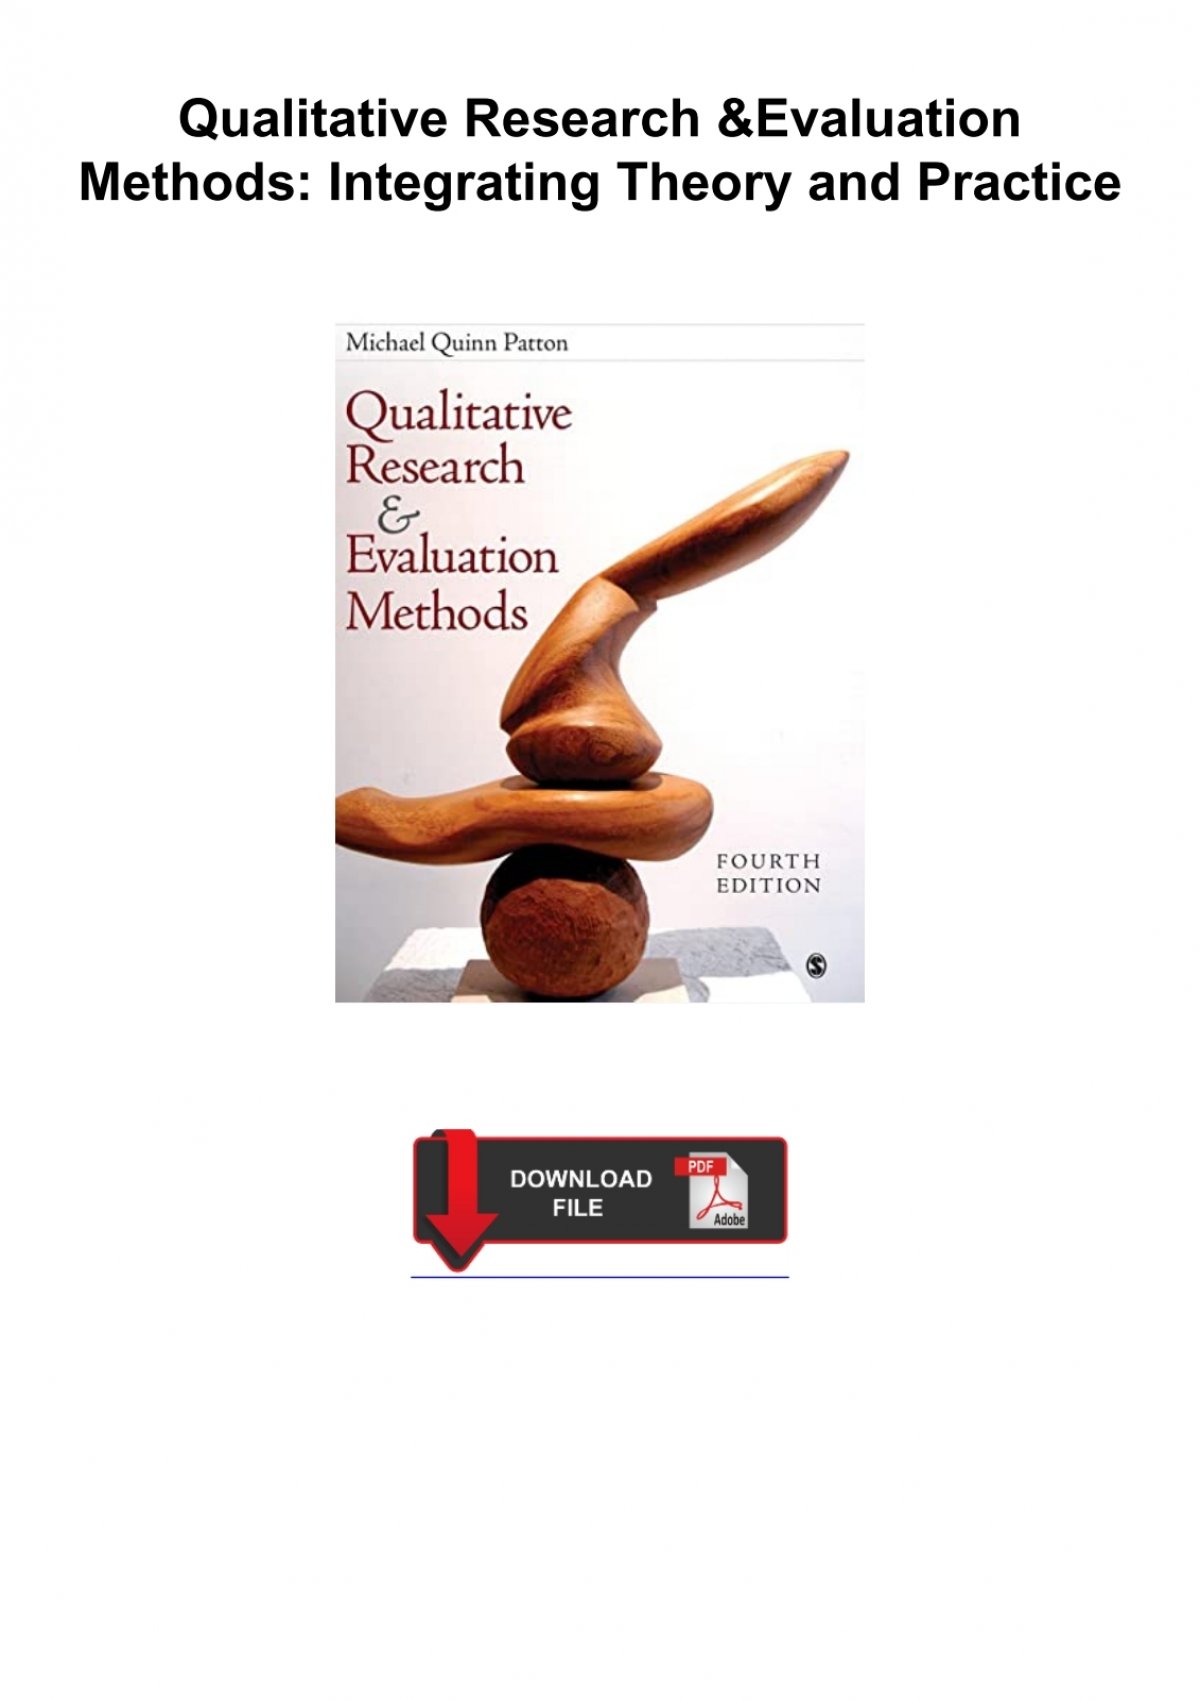 qualitative research & evaluation methods integrating theory and practice pdf